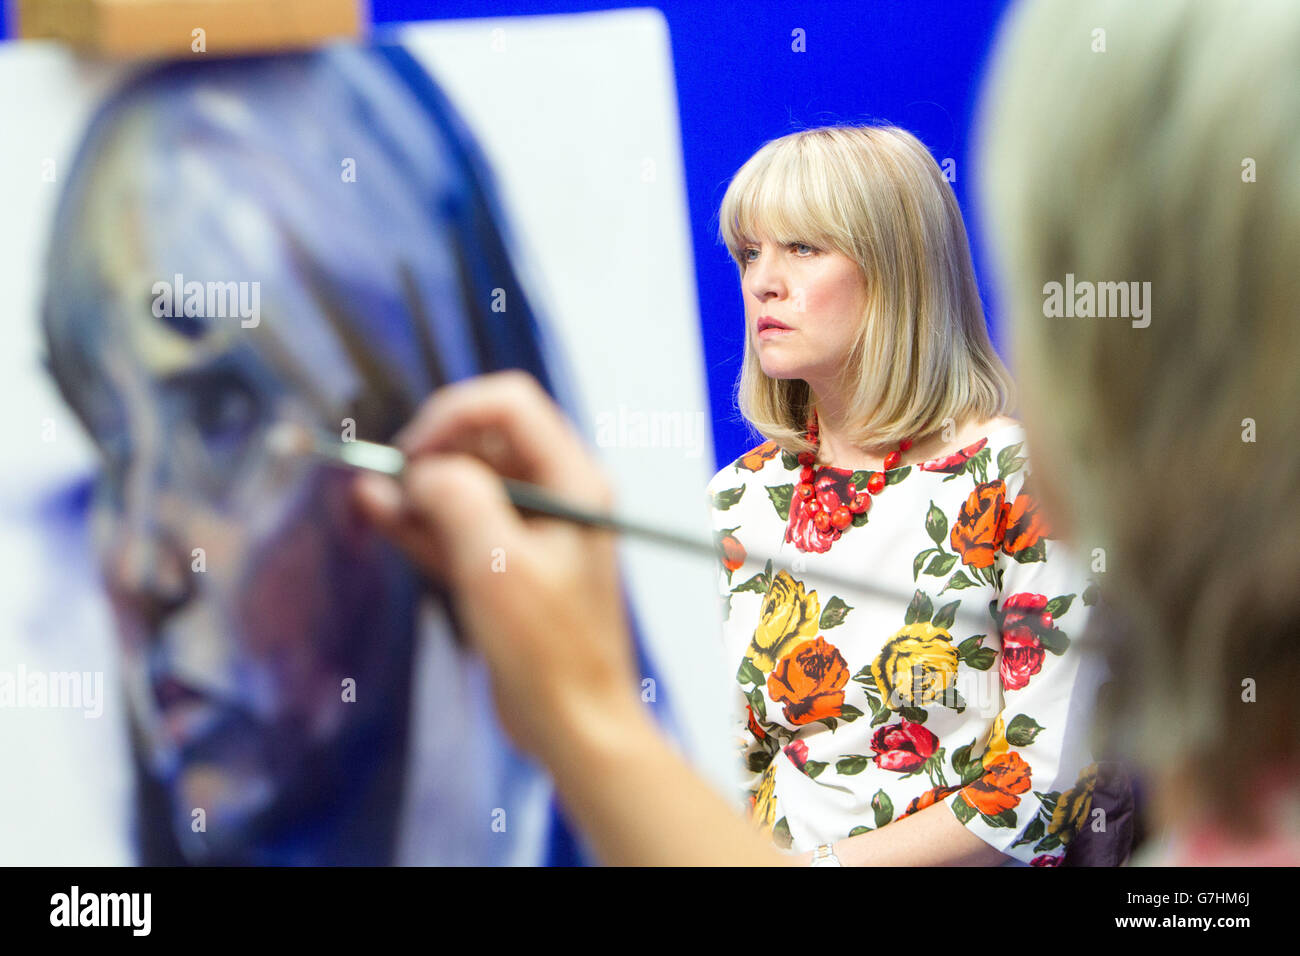 Artist painting portrait of Ashley Jensen at Easel Stock Photo